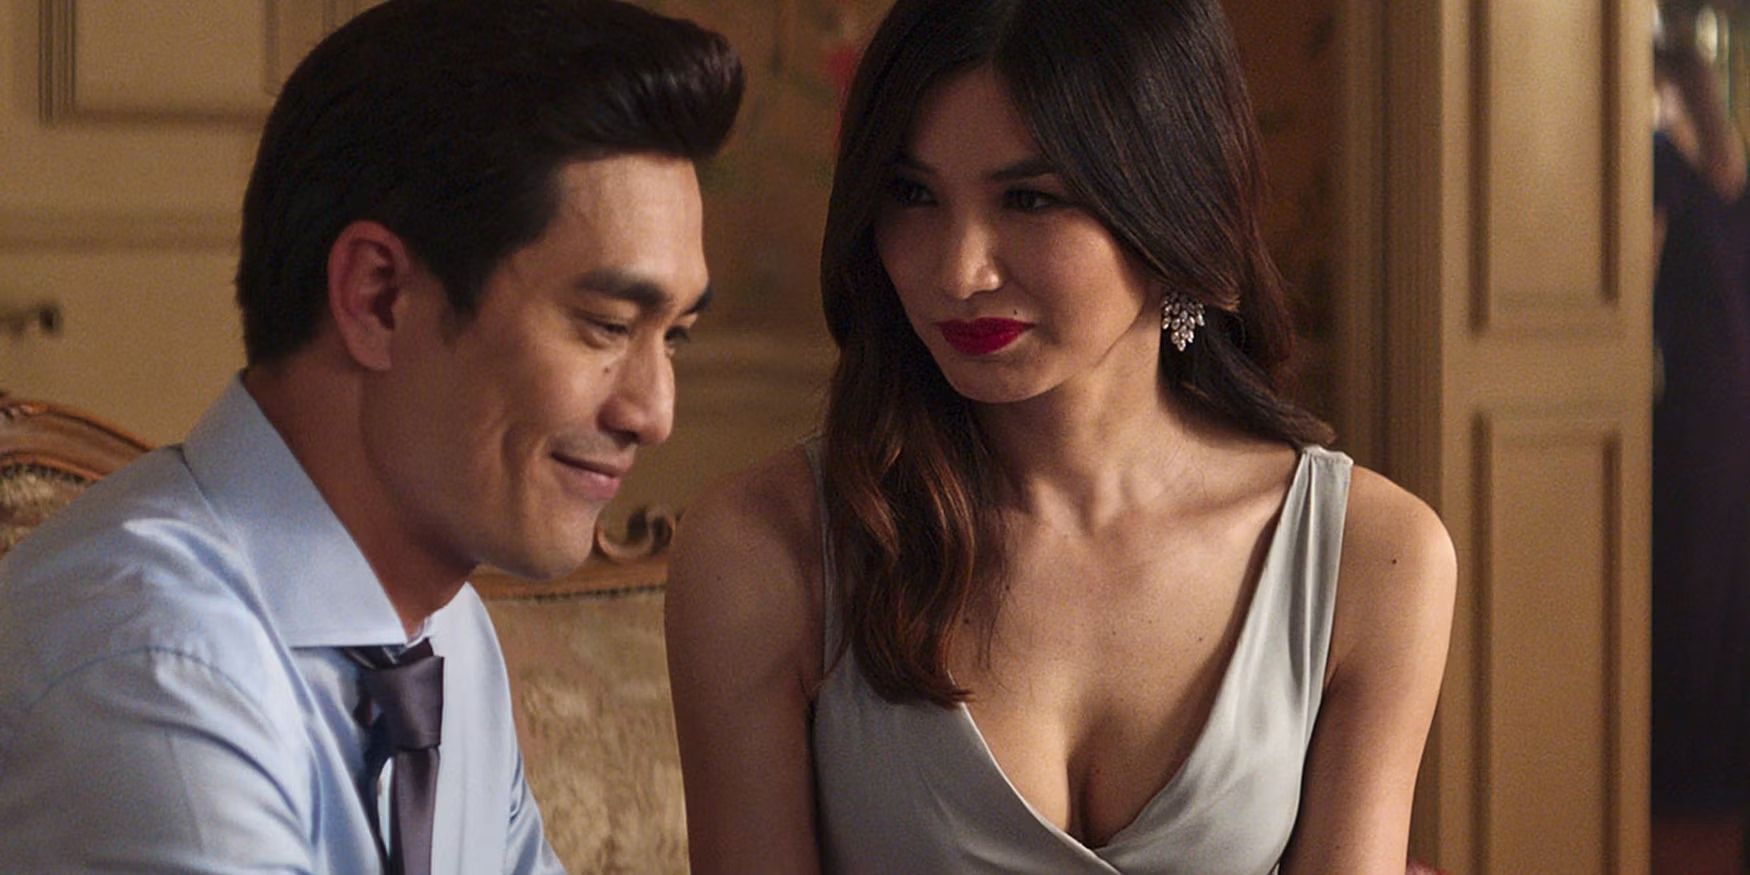 Pierre Png As Michael & Gemma Chan As Astrid In Crazy Rich Asians.jpg